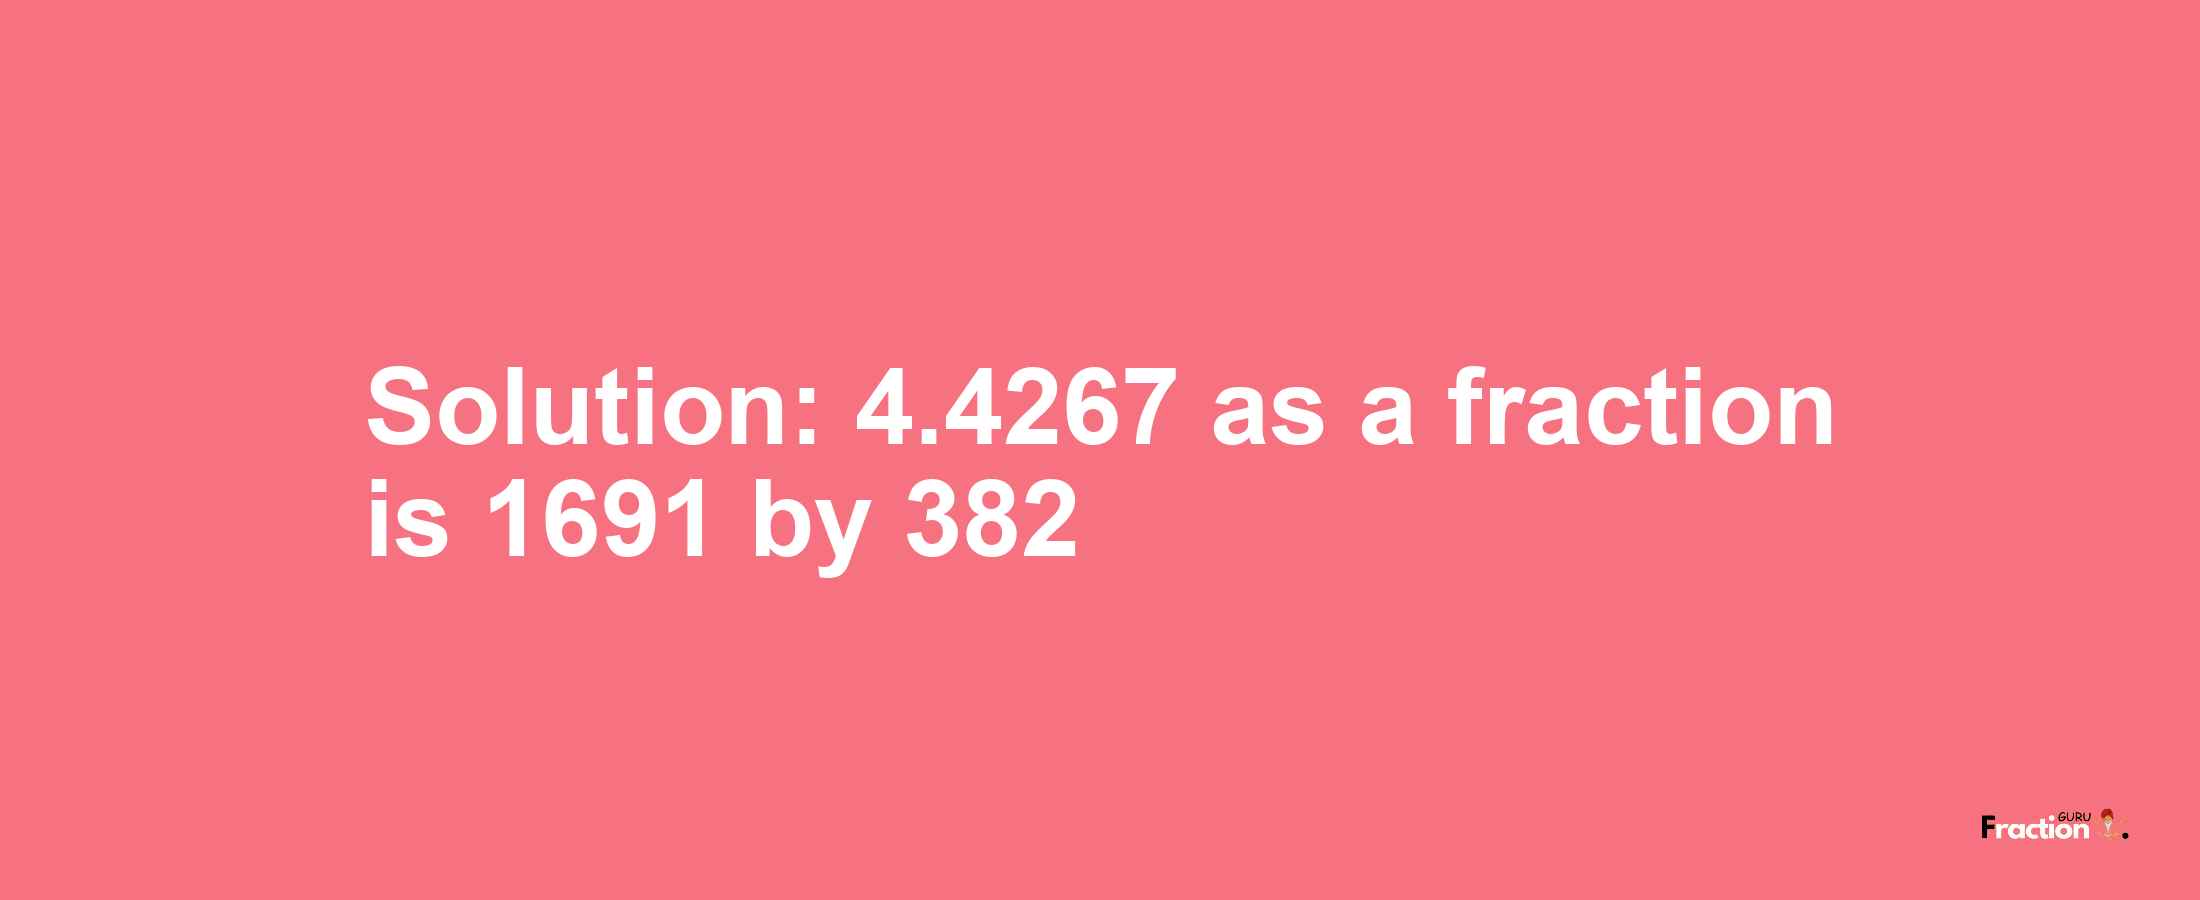 Solution:4.4267 as a fraction is 1691/382